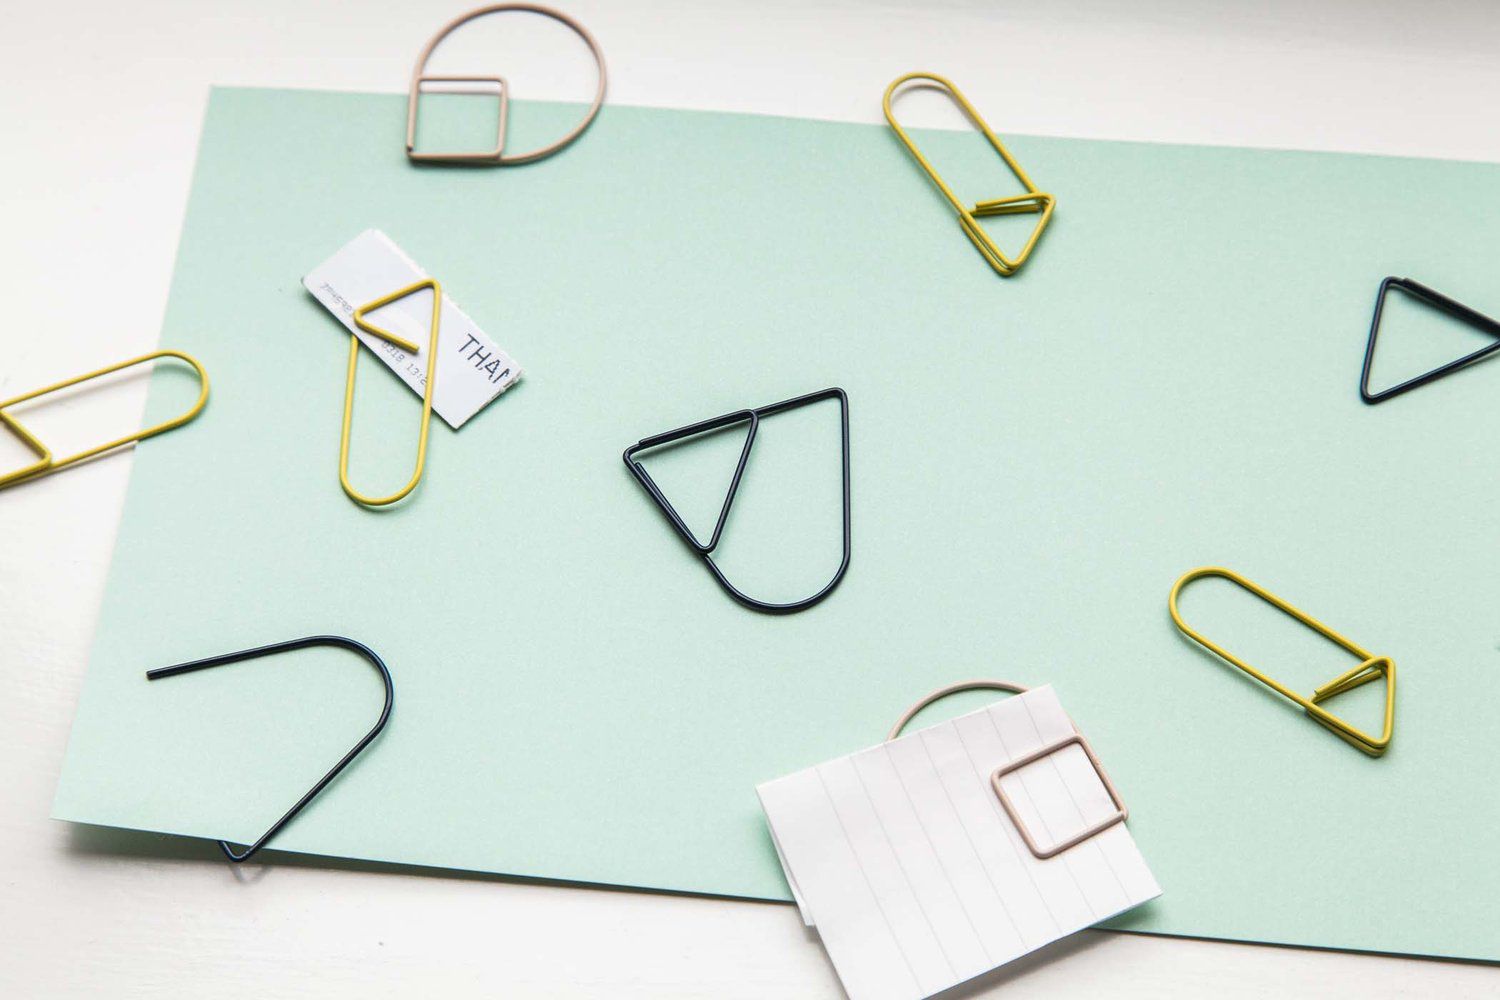 Make Use of Decorative Paper Clips